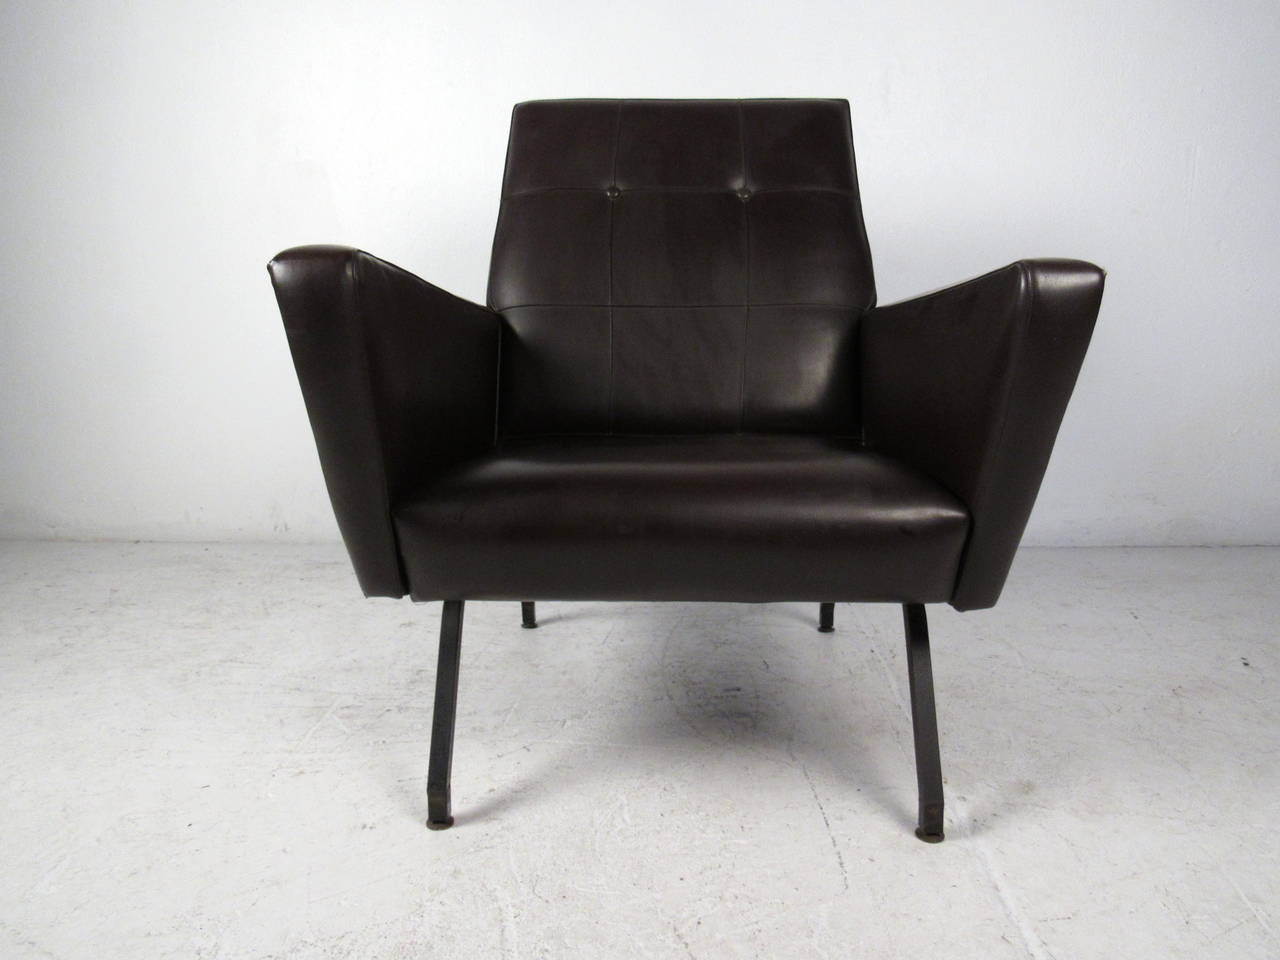 This midcentury lounge chair features sculpted arm rests, iron legs, and a tufted vinyl seat back which offers a modern style and comfortable seating to any home or office space.

Please confirm item location (NY or NJ) with dealer.